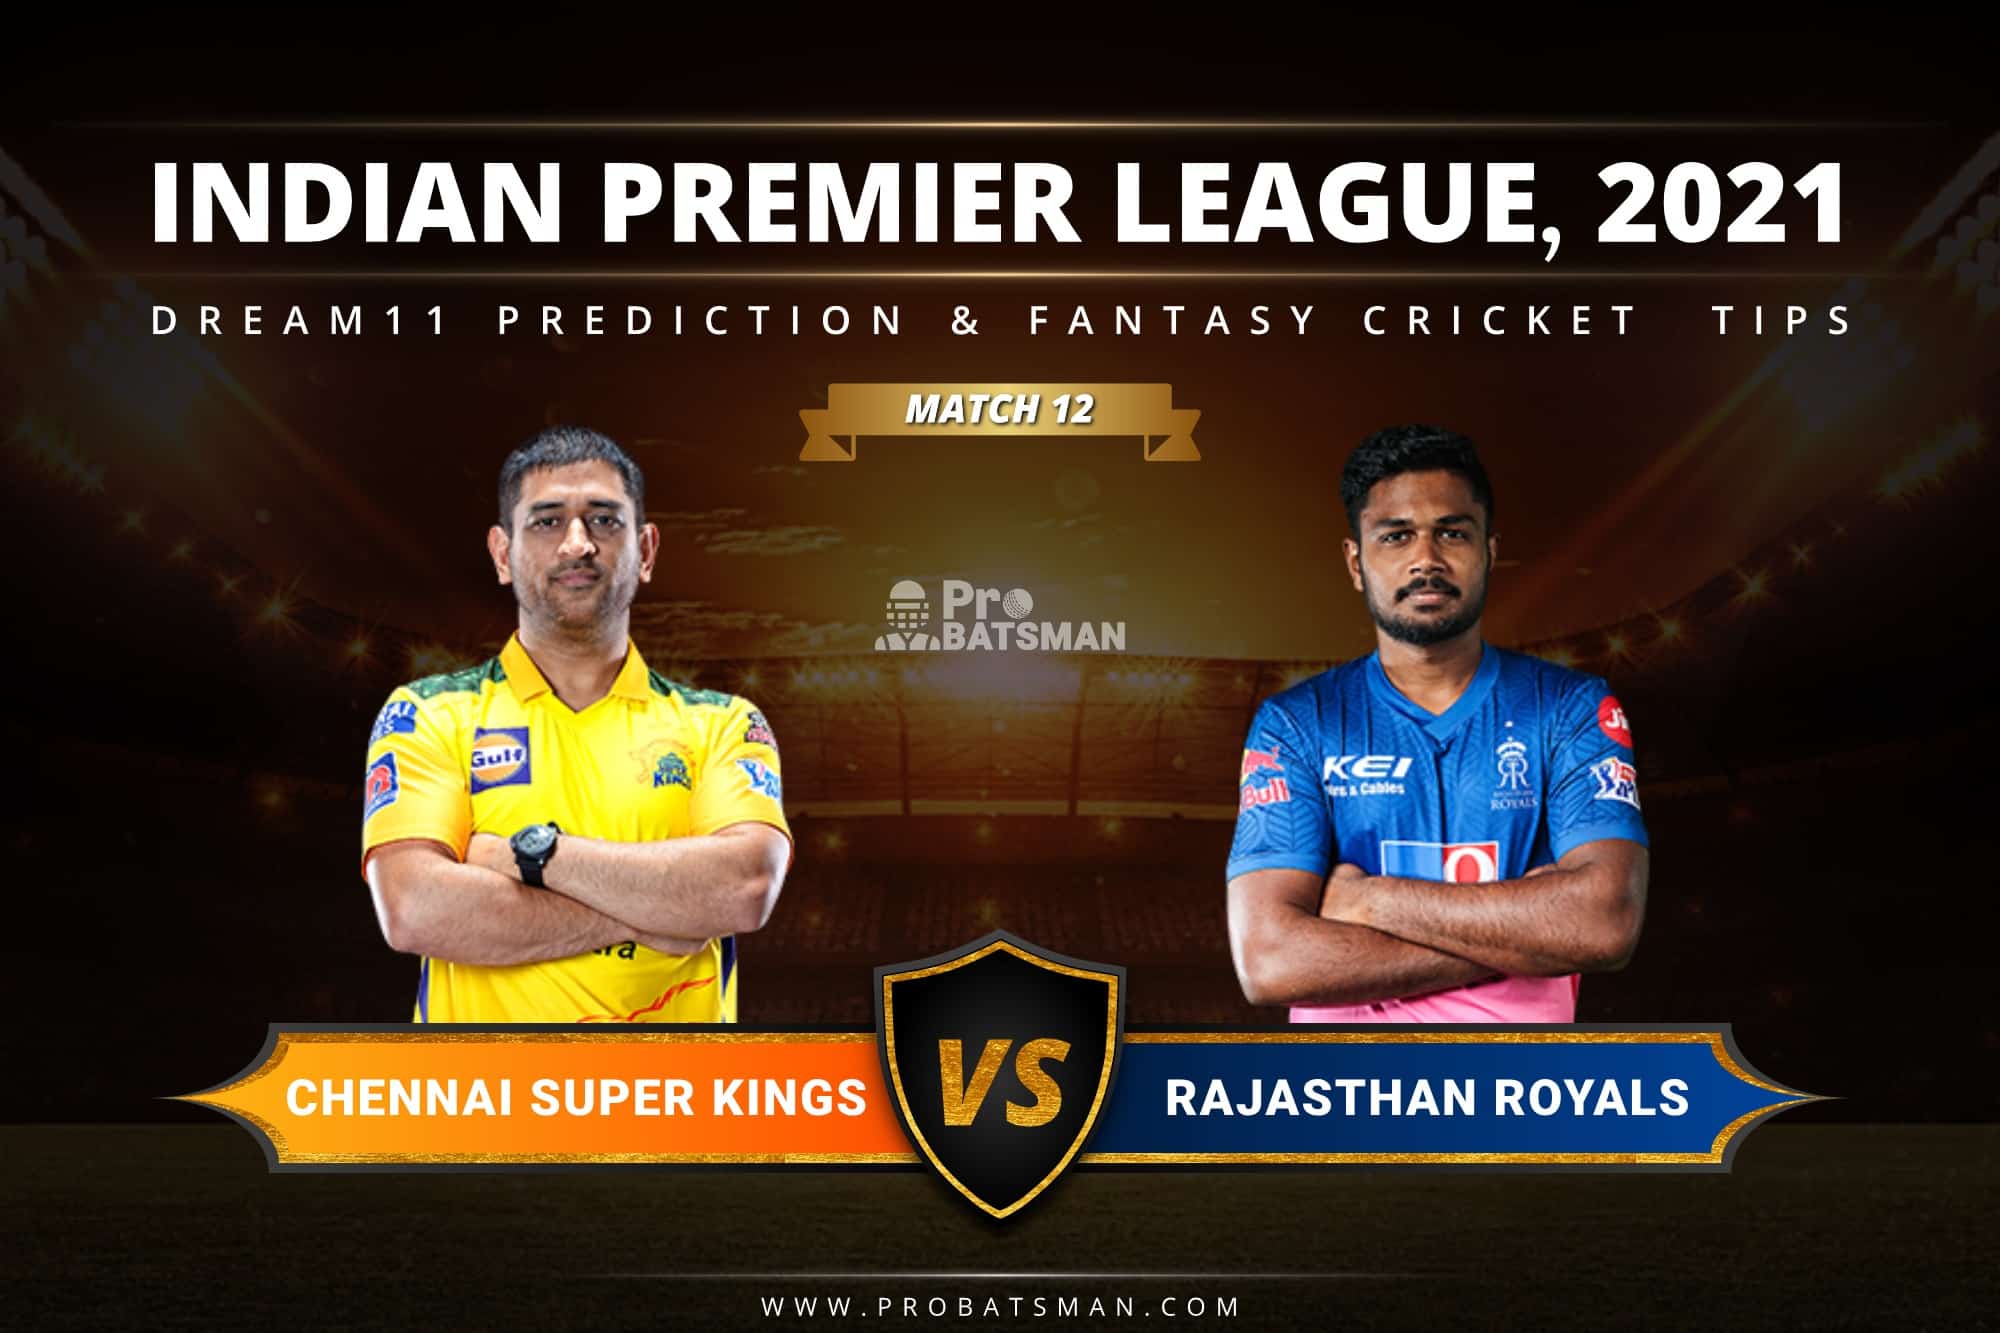 CSK vs RR Dream11 Prediction: Fantasy Cricket Tips, Playing XI, Pitch Report, Stats & Injury Updates of Match 12, IPL 2021